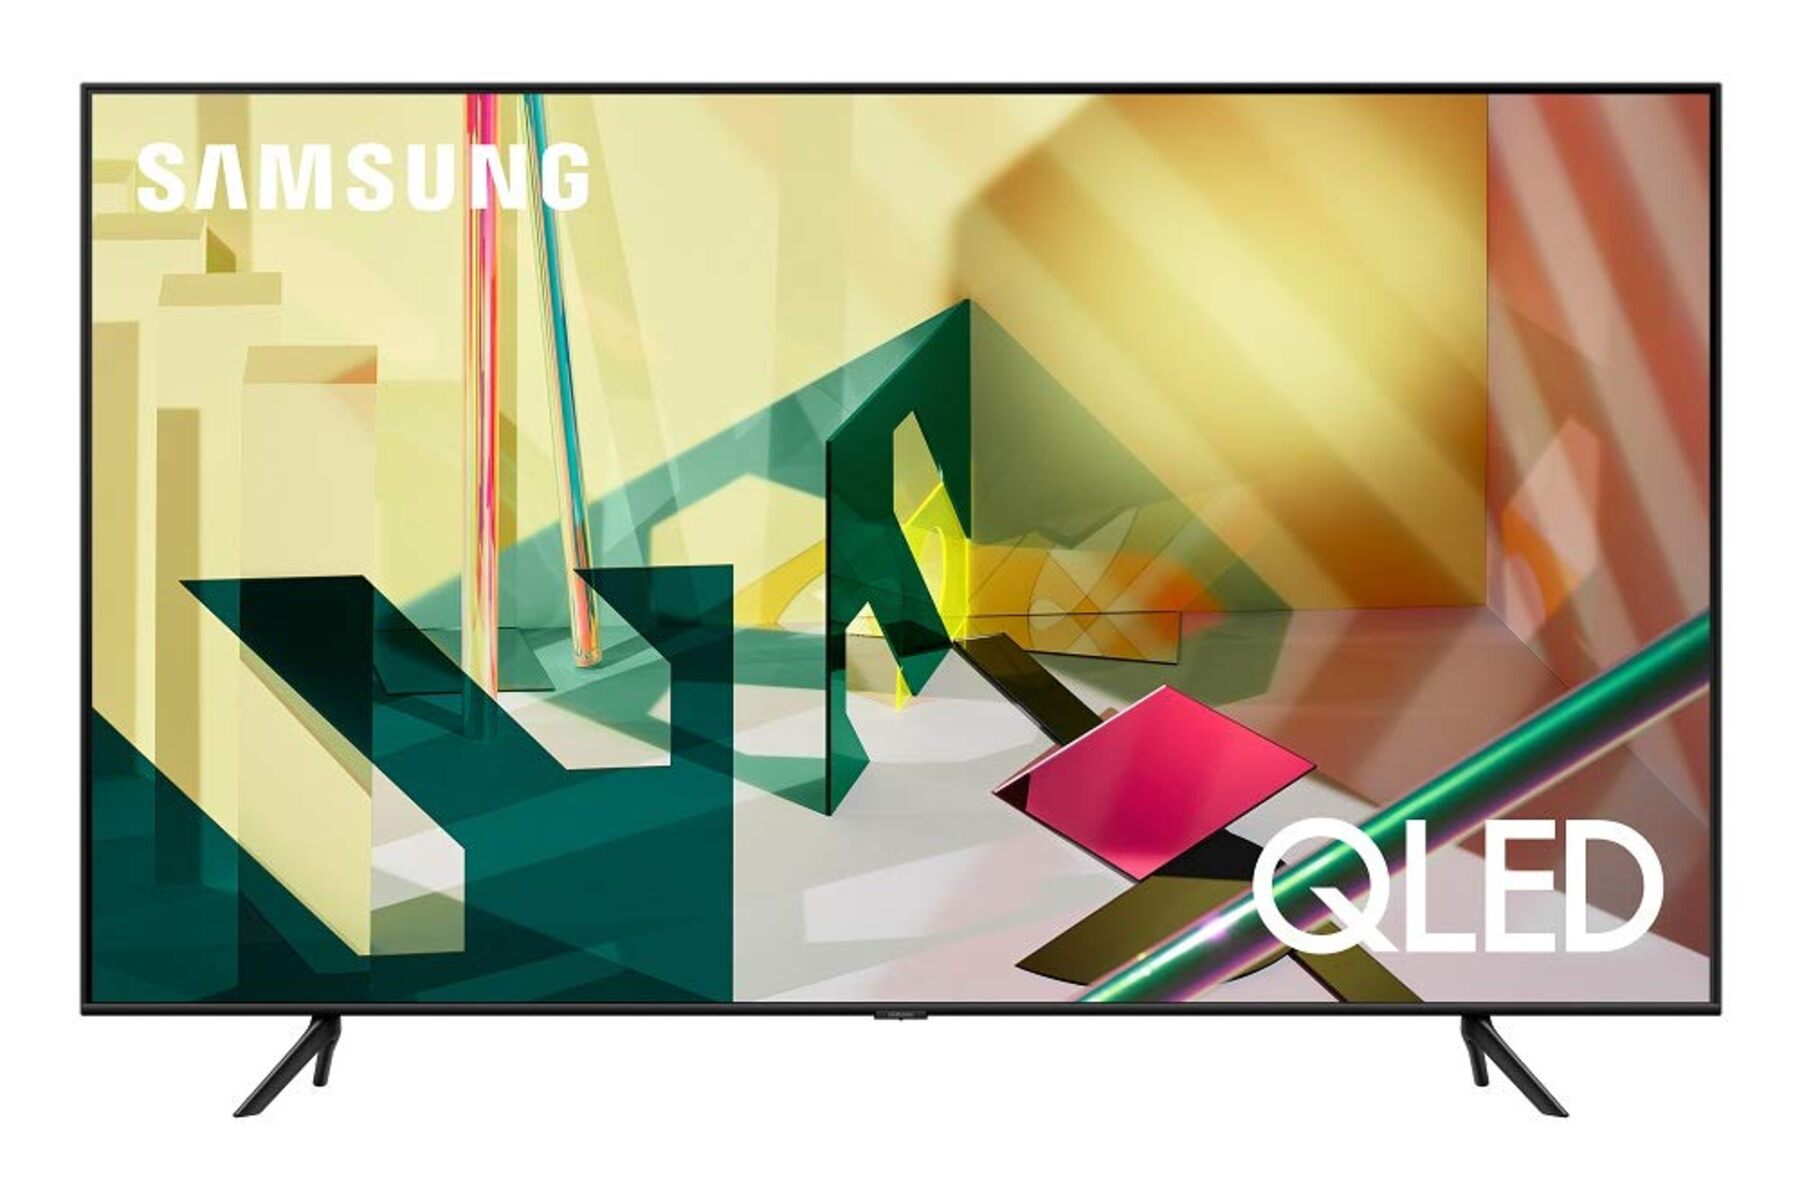 What Is The Difference Between Samsung 6 And 7 Series And 8 And 9 Series QLED TV